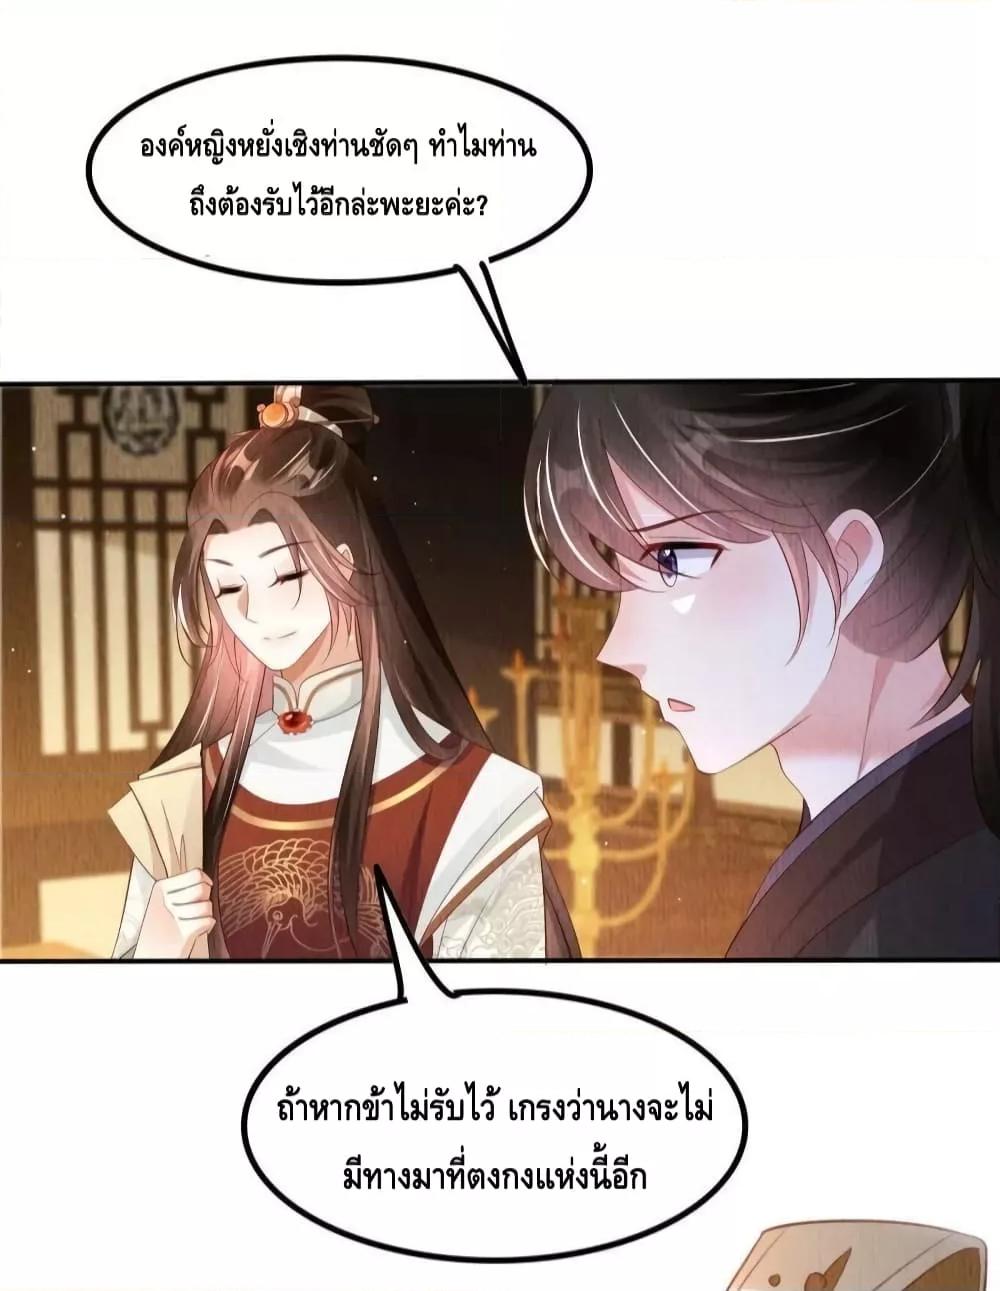 After I Bloom, a Hundred Flowers Will ill – ดอกไม้นับ ตอนที่ 53 (24)